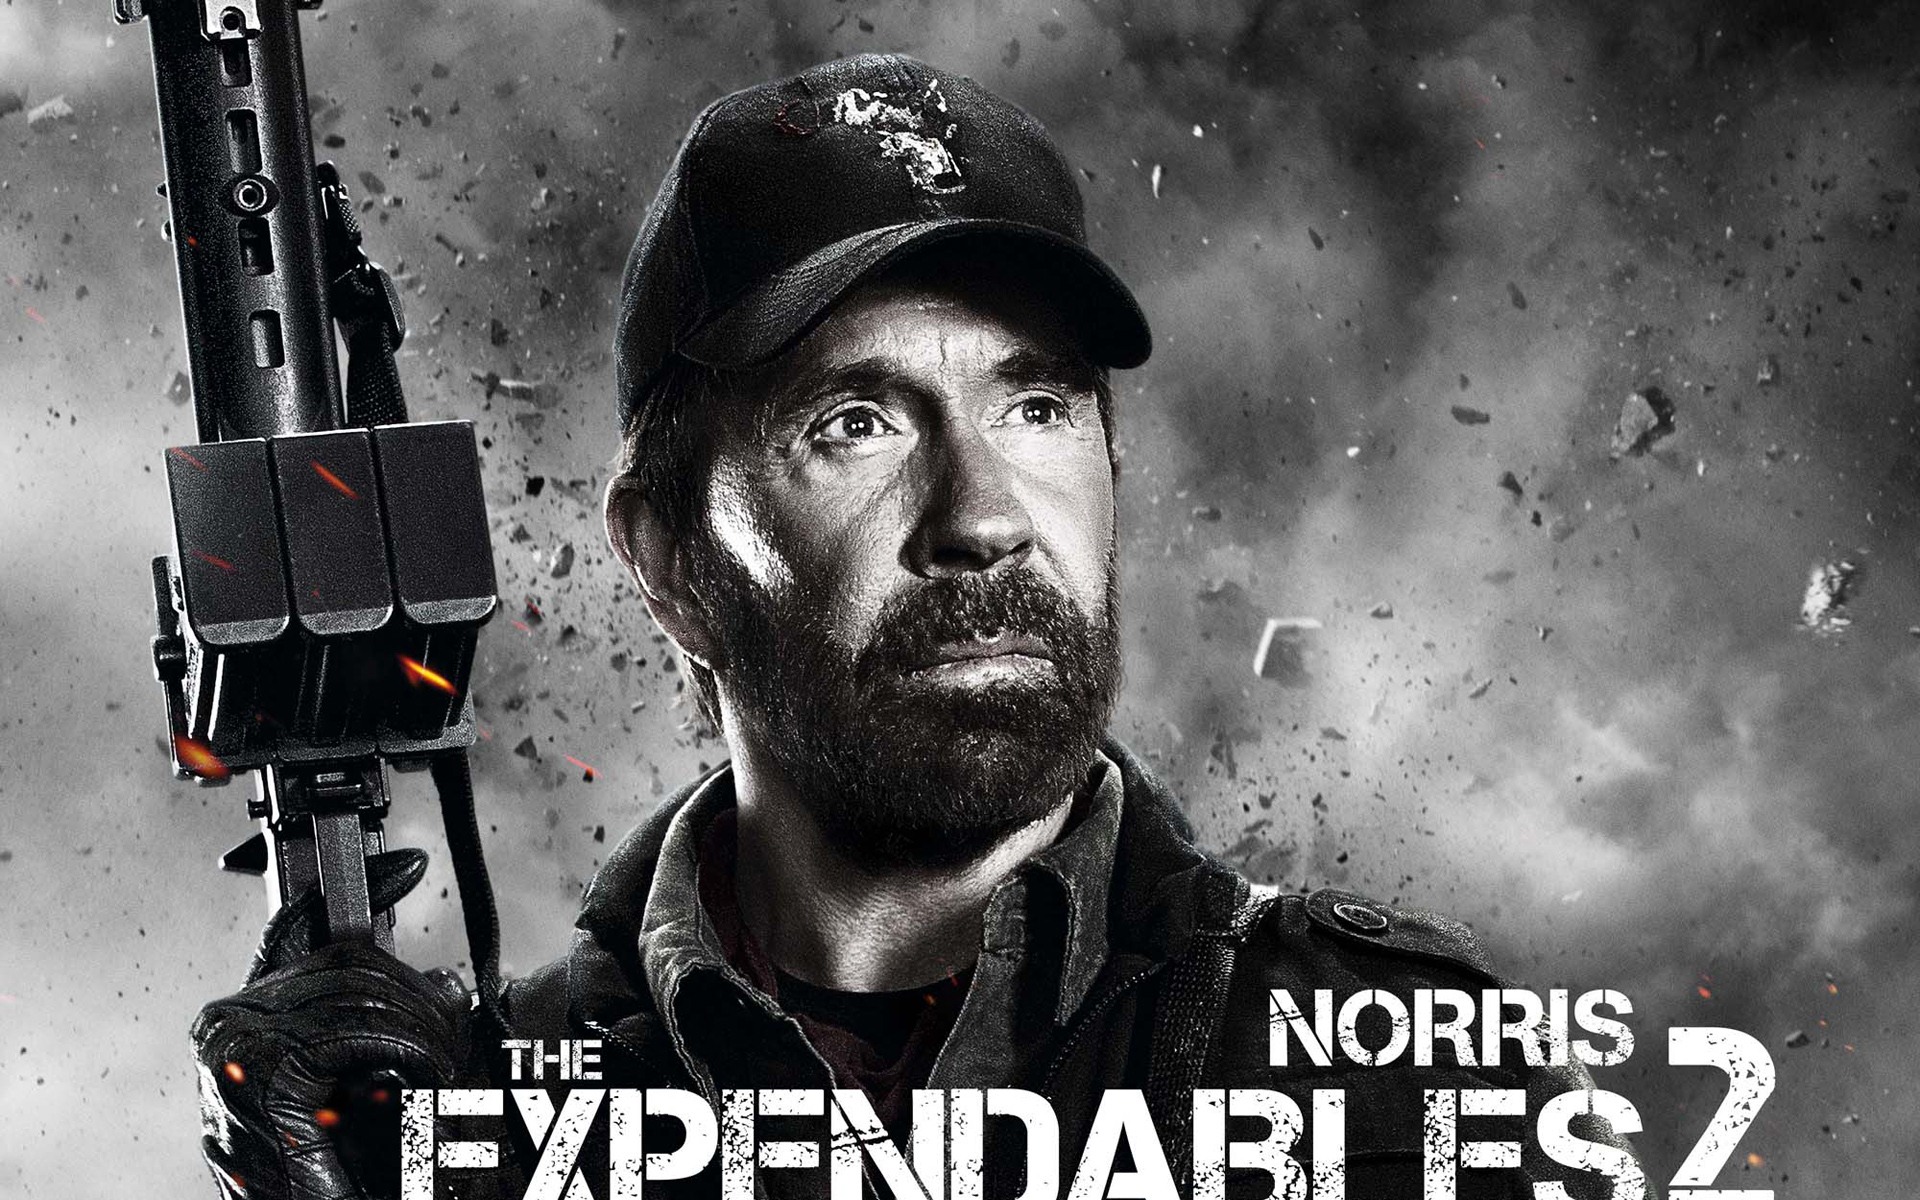 2012 The Expendables 2 HD Wallpaper #13 - 1920x1200